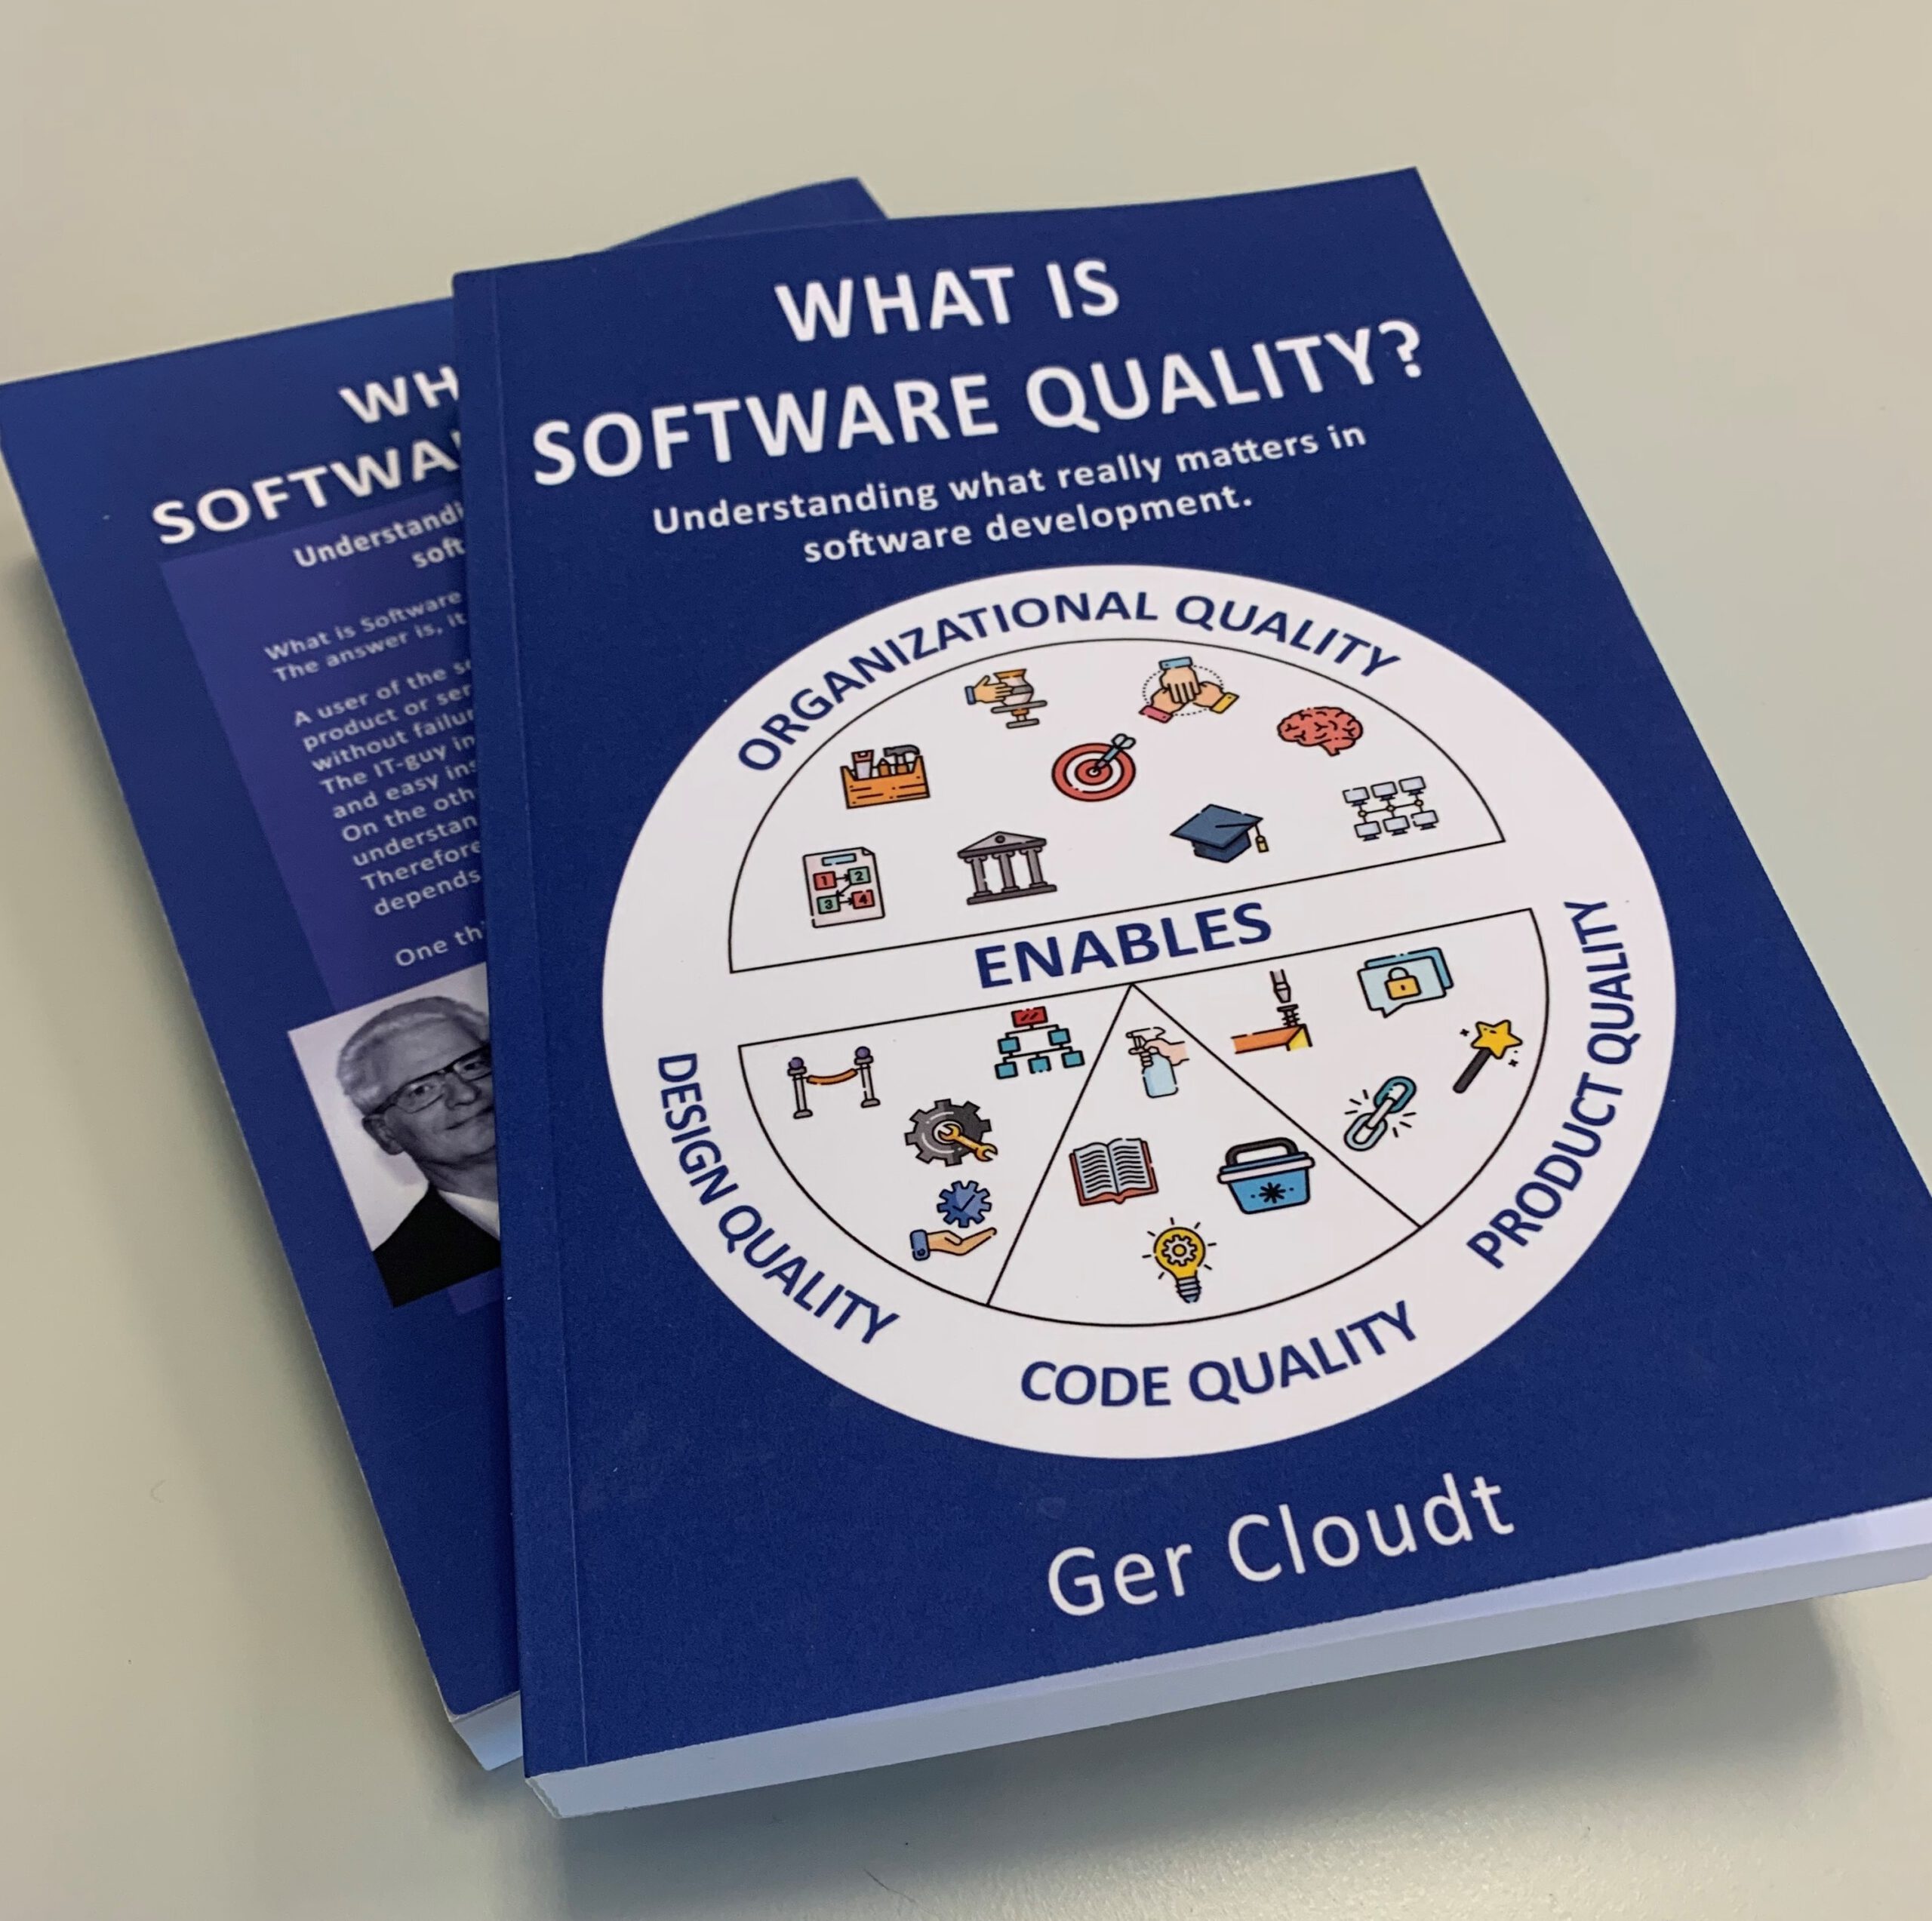 book "What is Software Quality?"